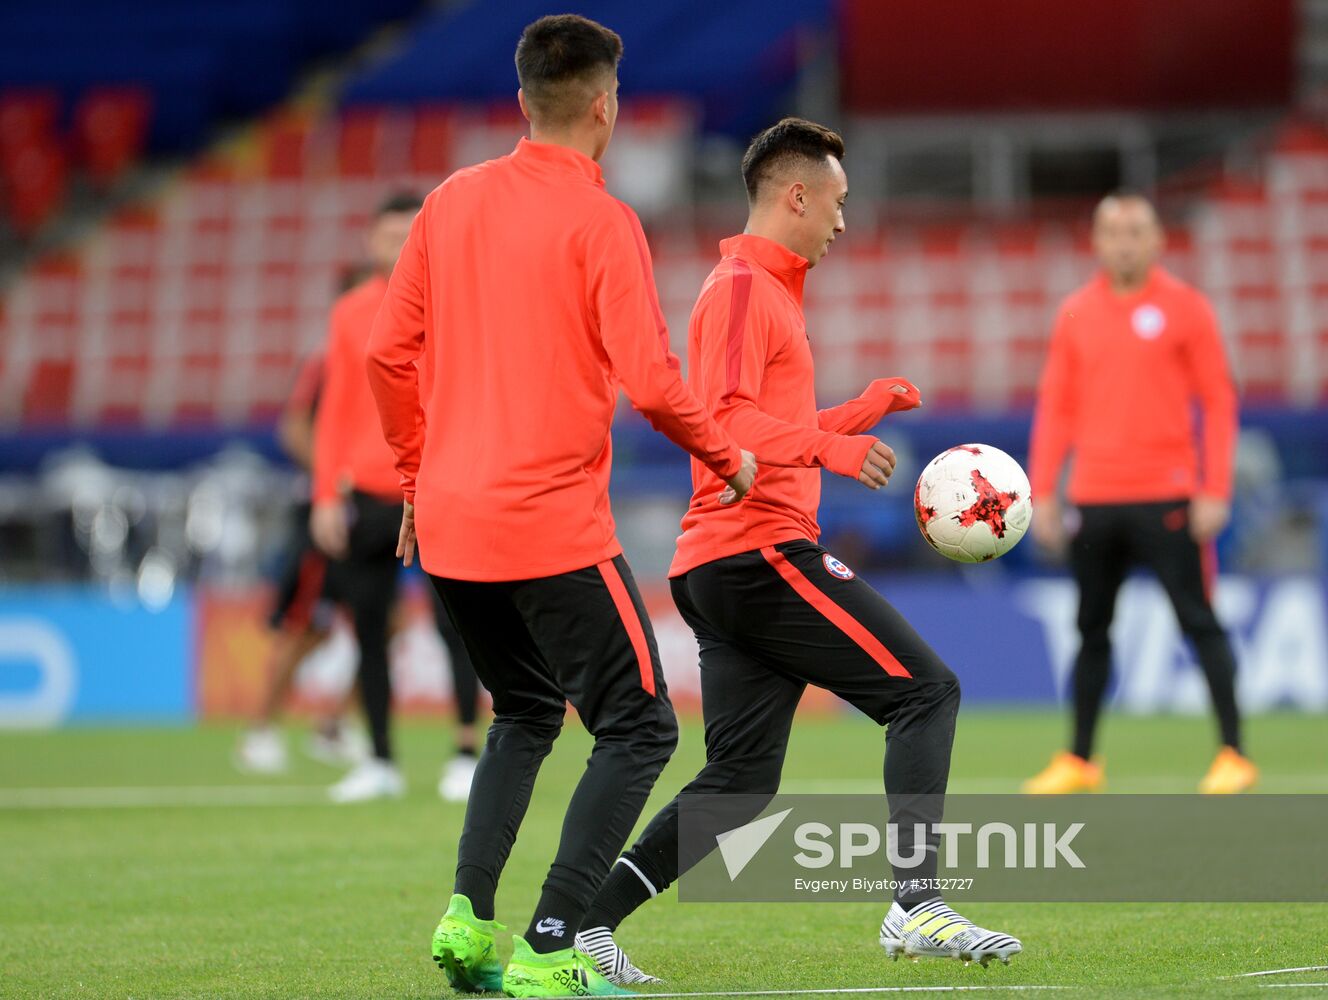 Football. 2017 FIFA Confederations Cup. Training session of Chile’s national team